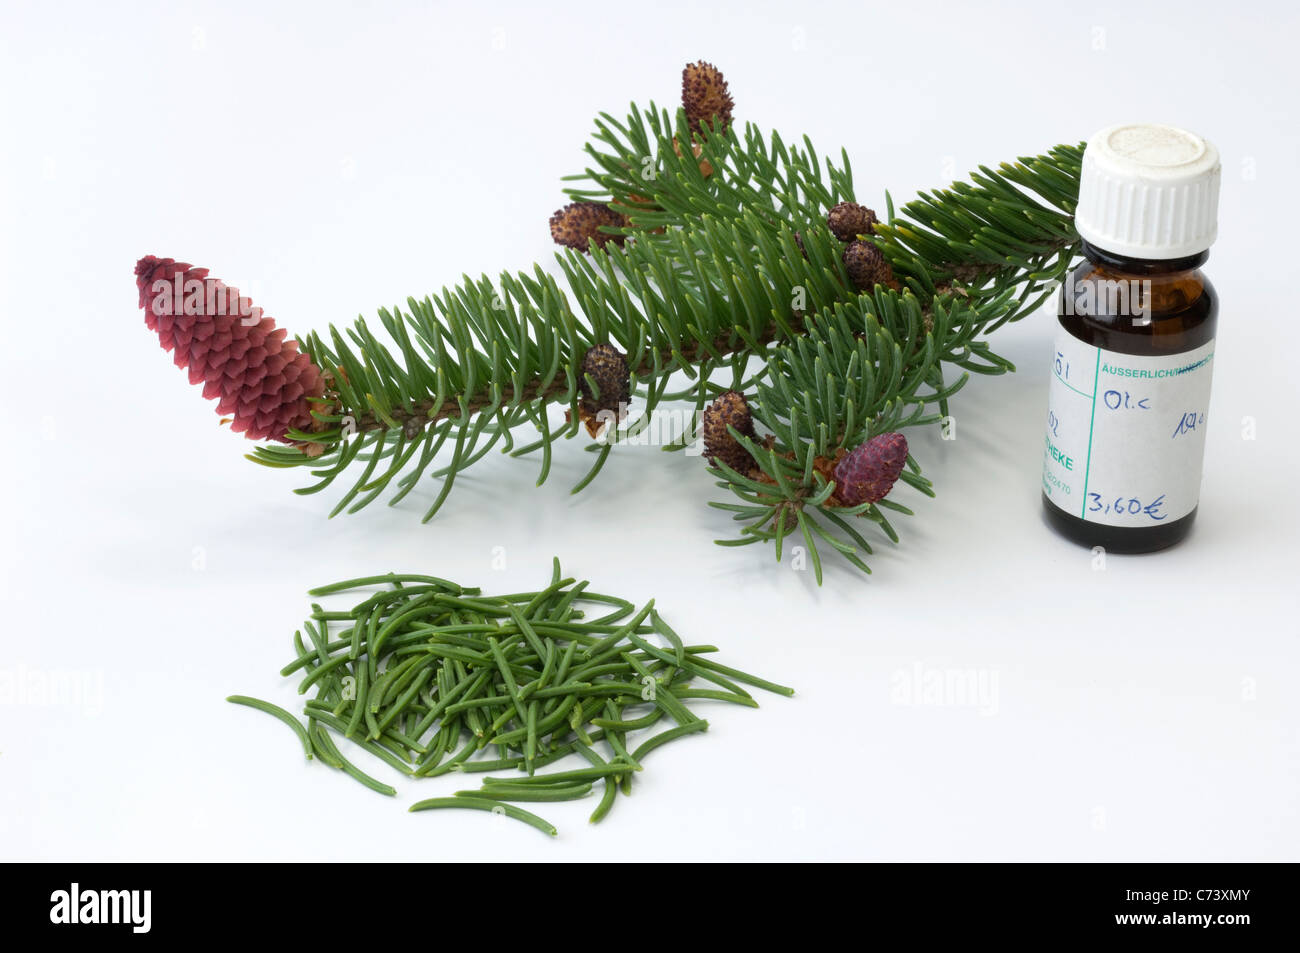 Common Spruce, Norway Spruce (Picea abies). Twig with flowers, cone and small bottle of essential oil Stock Photo